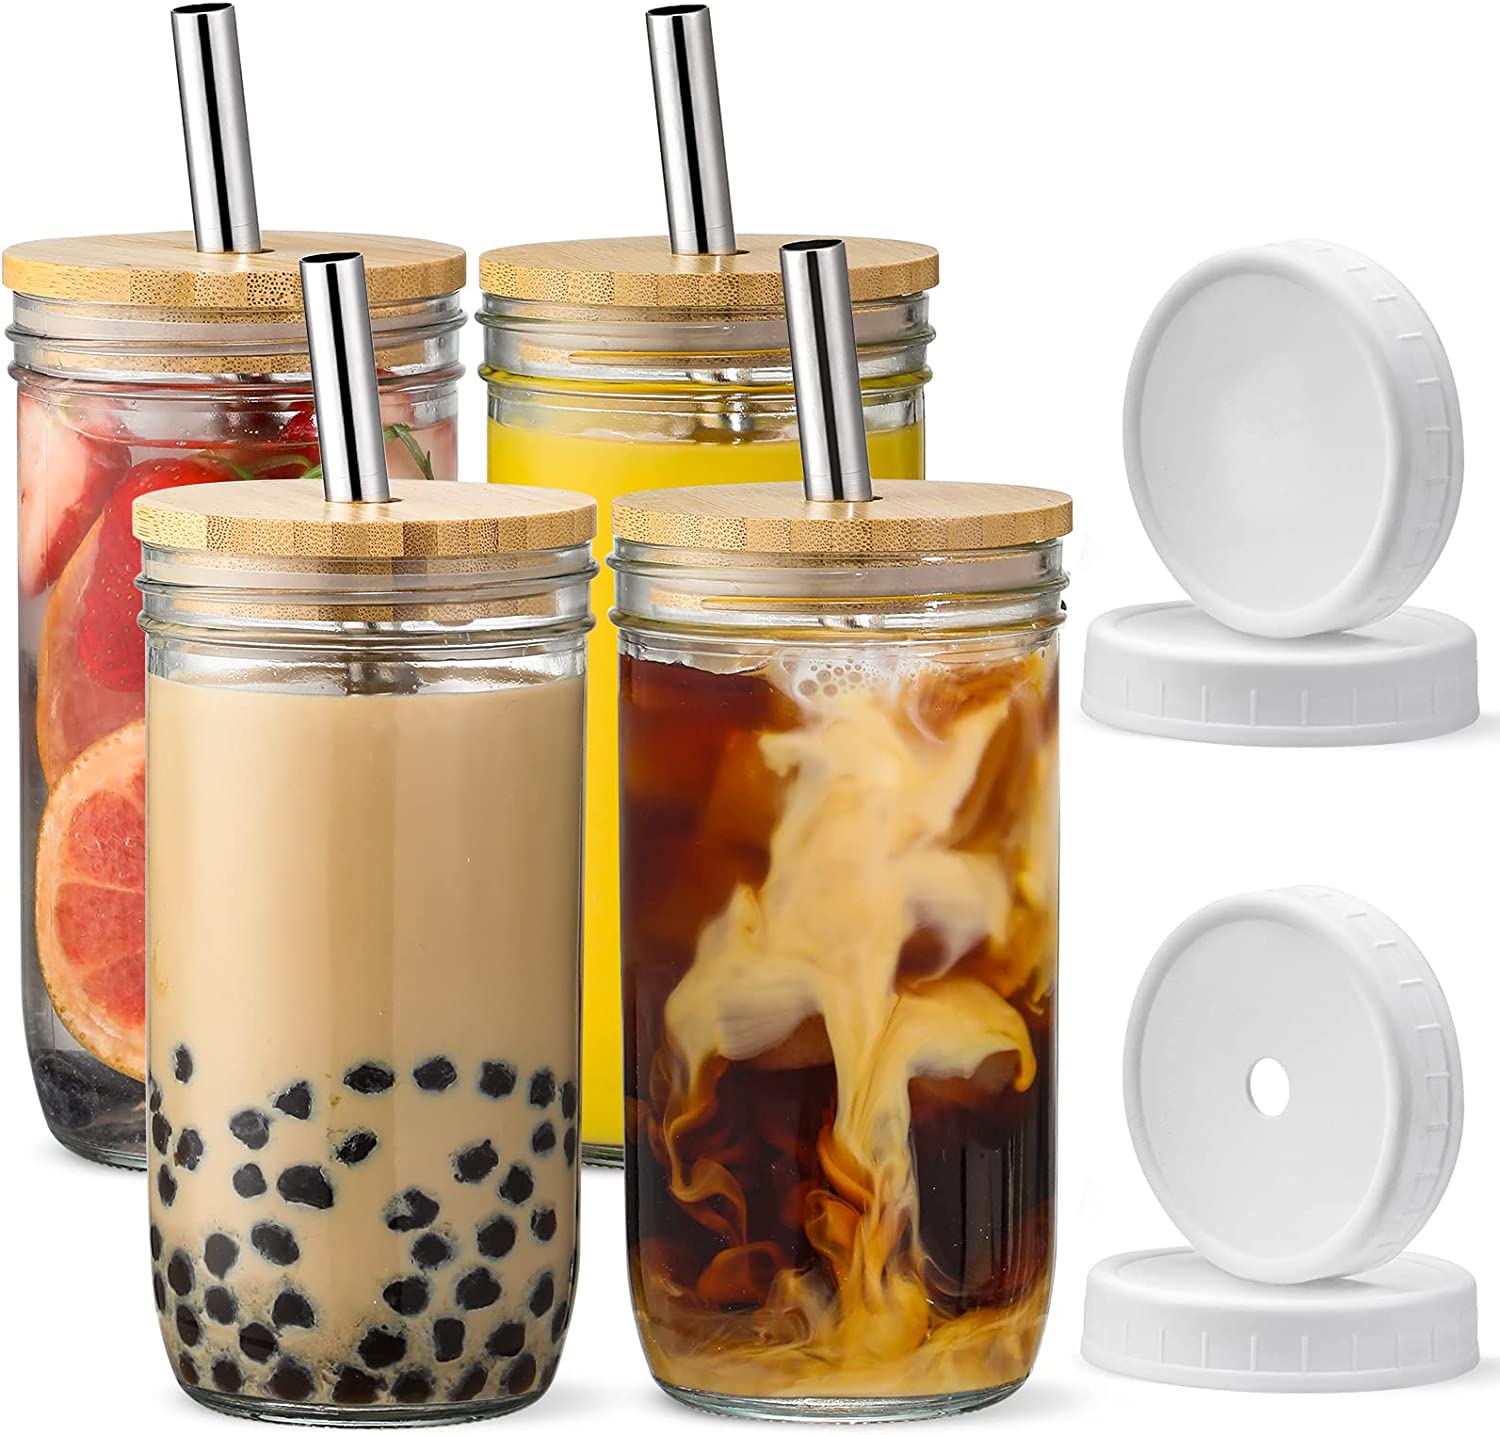 Reusable 24oz Mason Jar Drinking Glasses with Bamboo Lids and Straws for Iced Coffee for Bubble Tea smoothie Juice